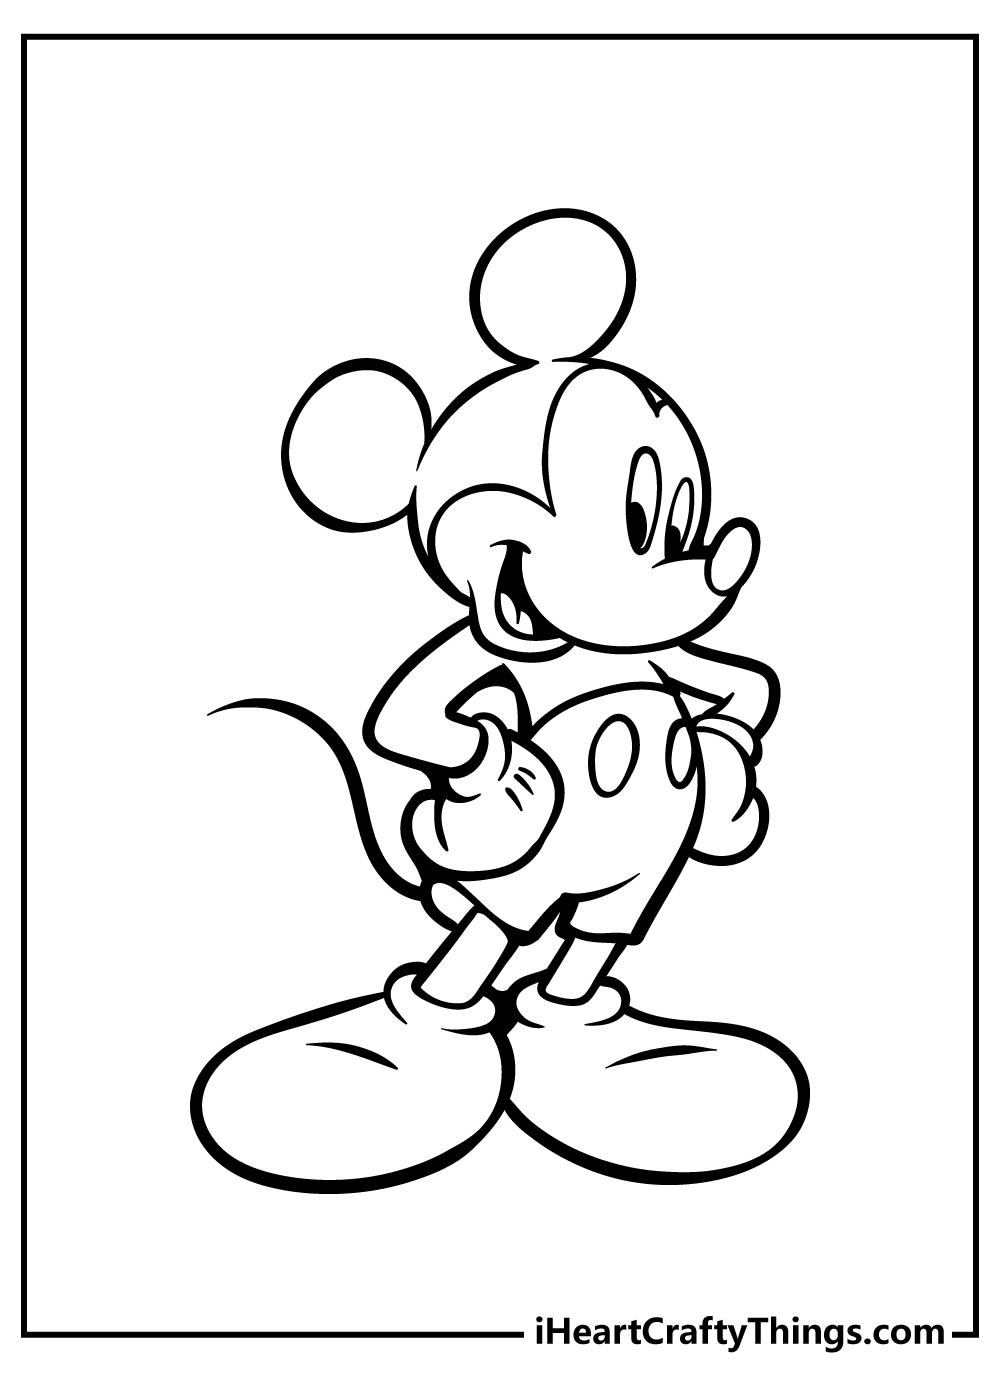 Printable Mickey Mouse Coloring Pages Updated 20